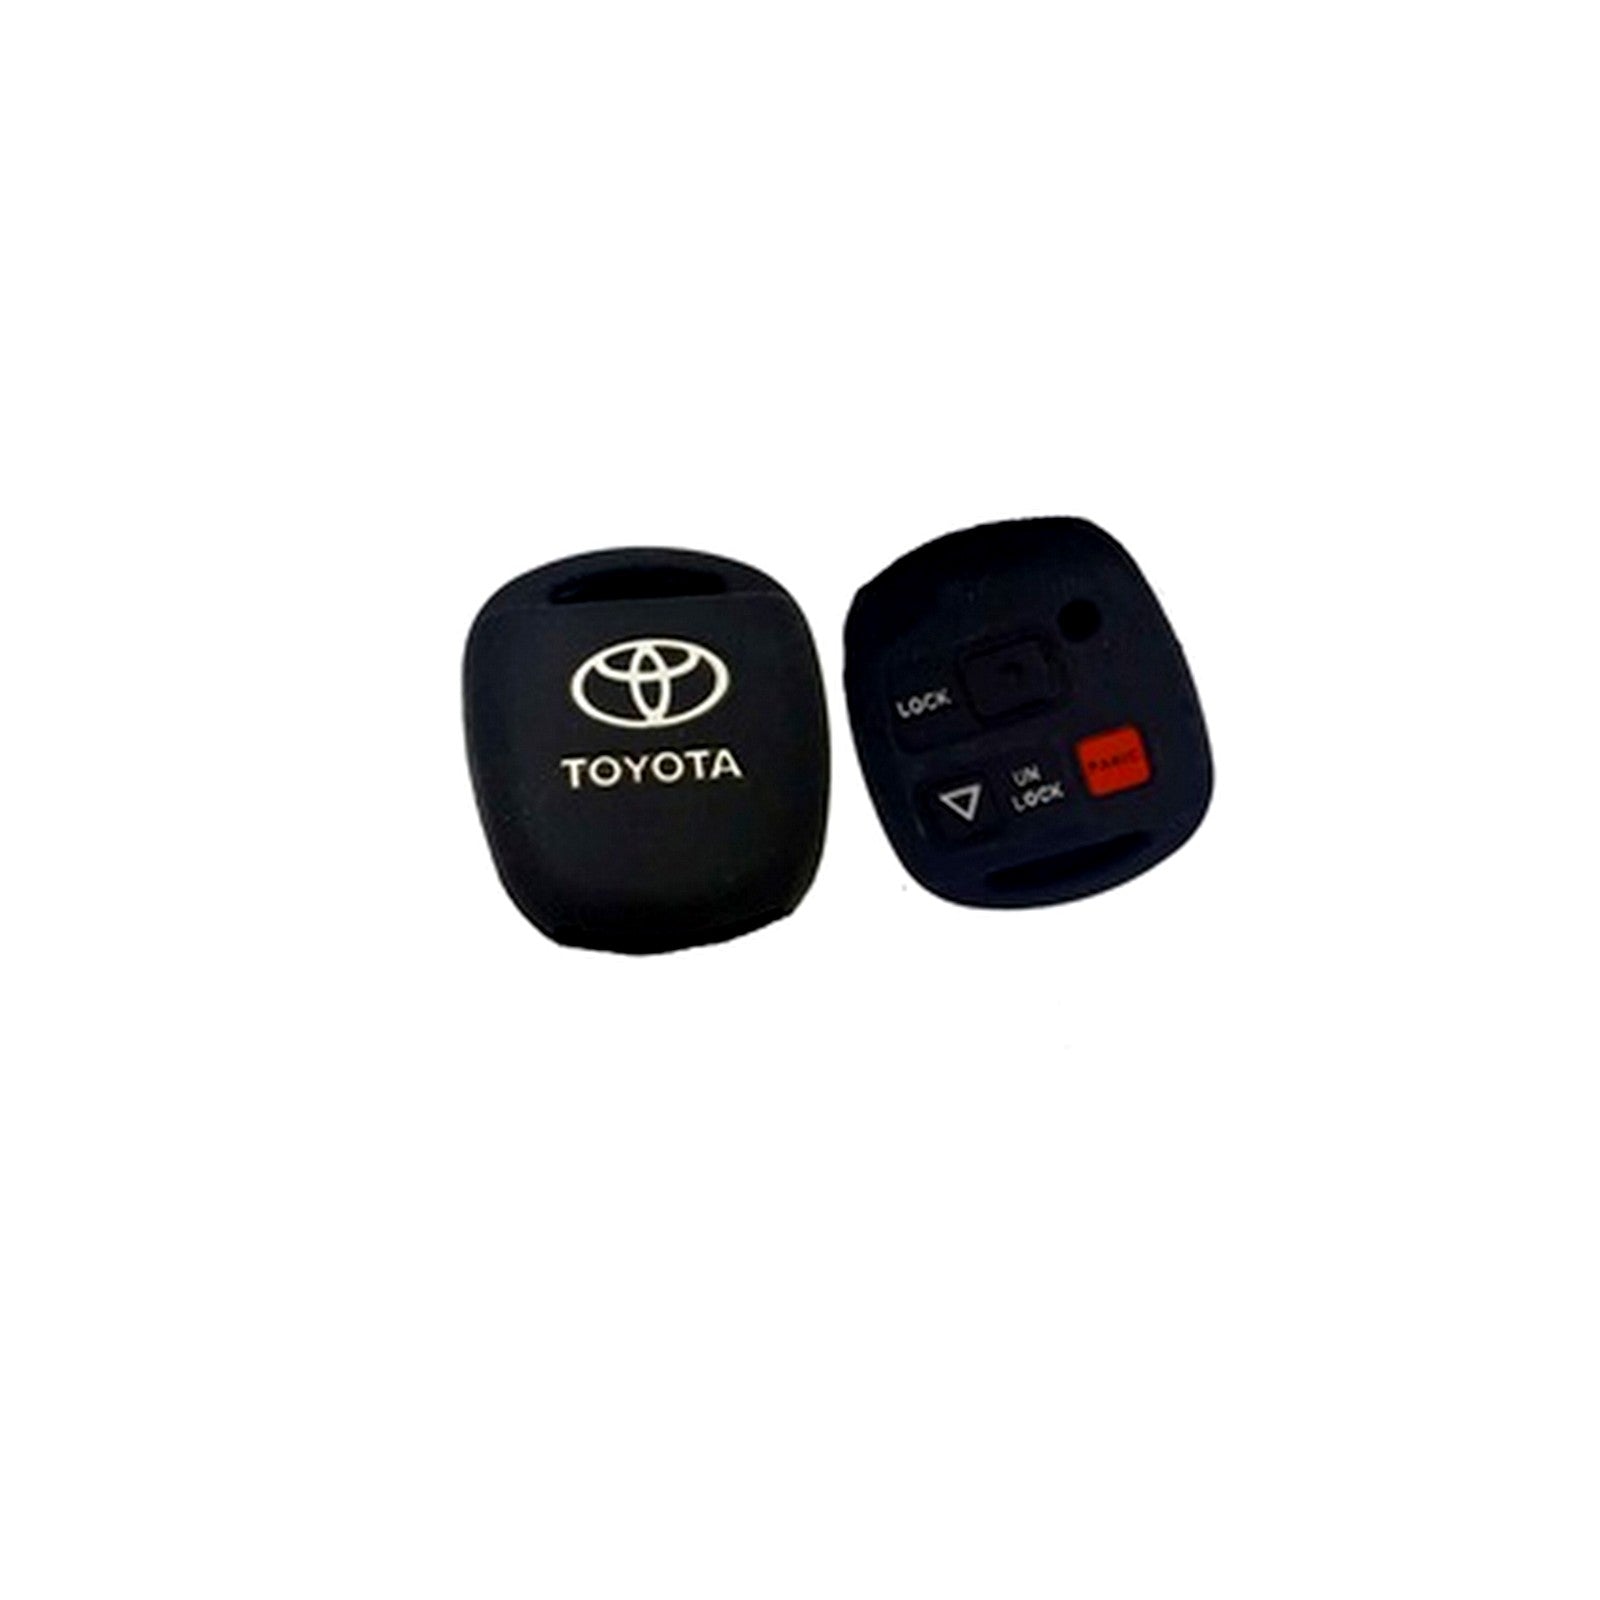 KEY COVER PREMIUM QUALITY FOR TOYOTA COROLLA - NDE STORE